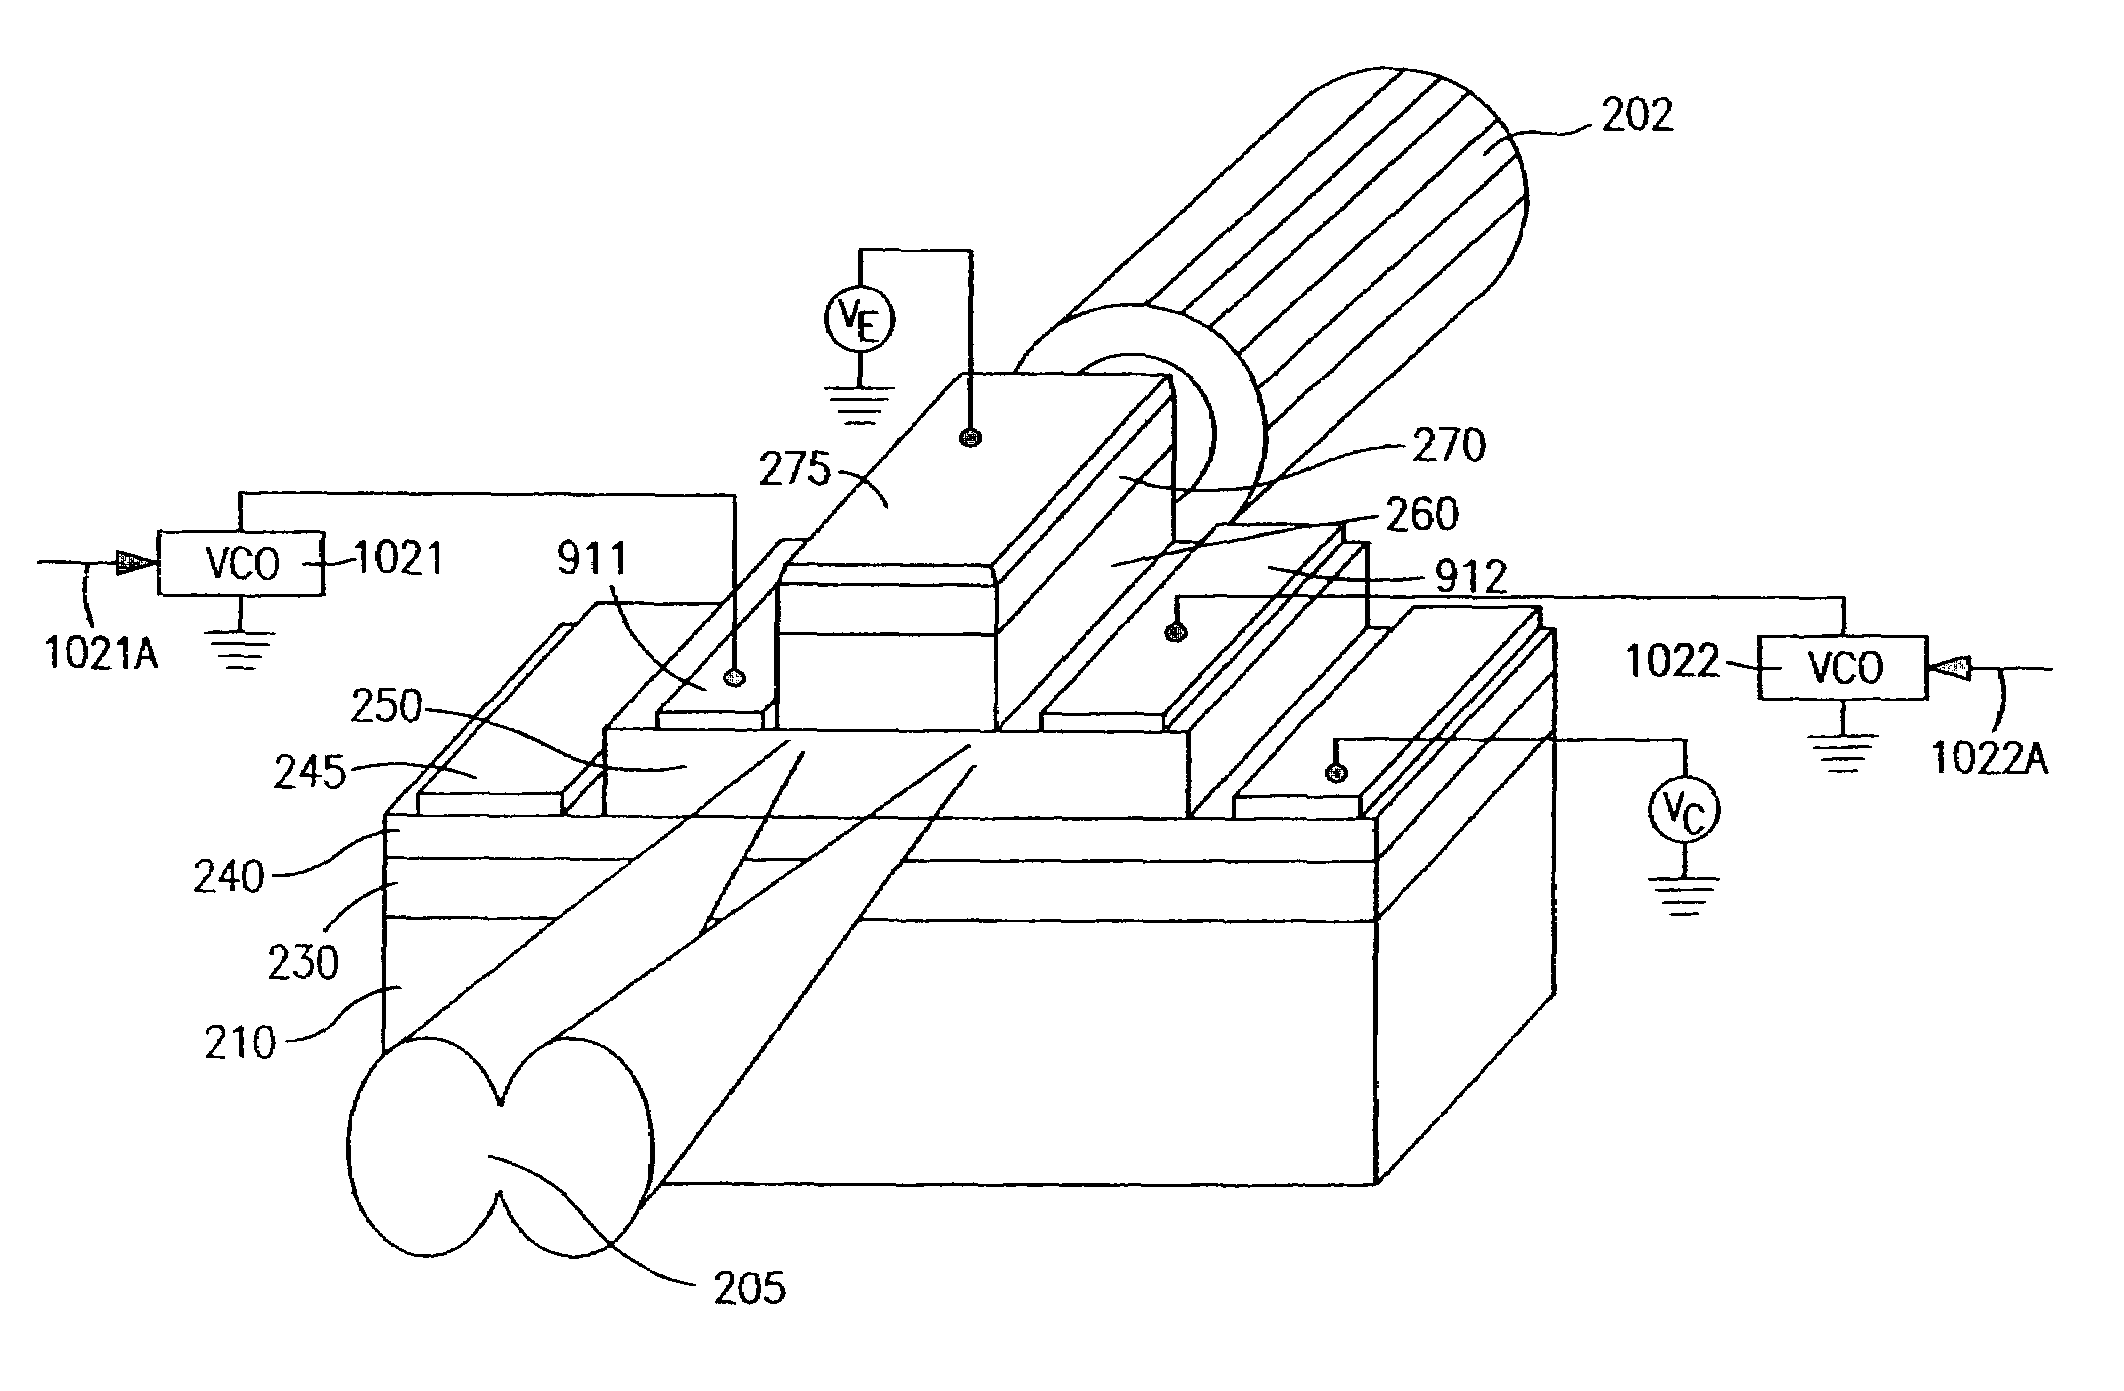 Semiconductor light emitting devices and methods